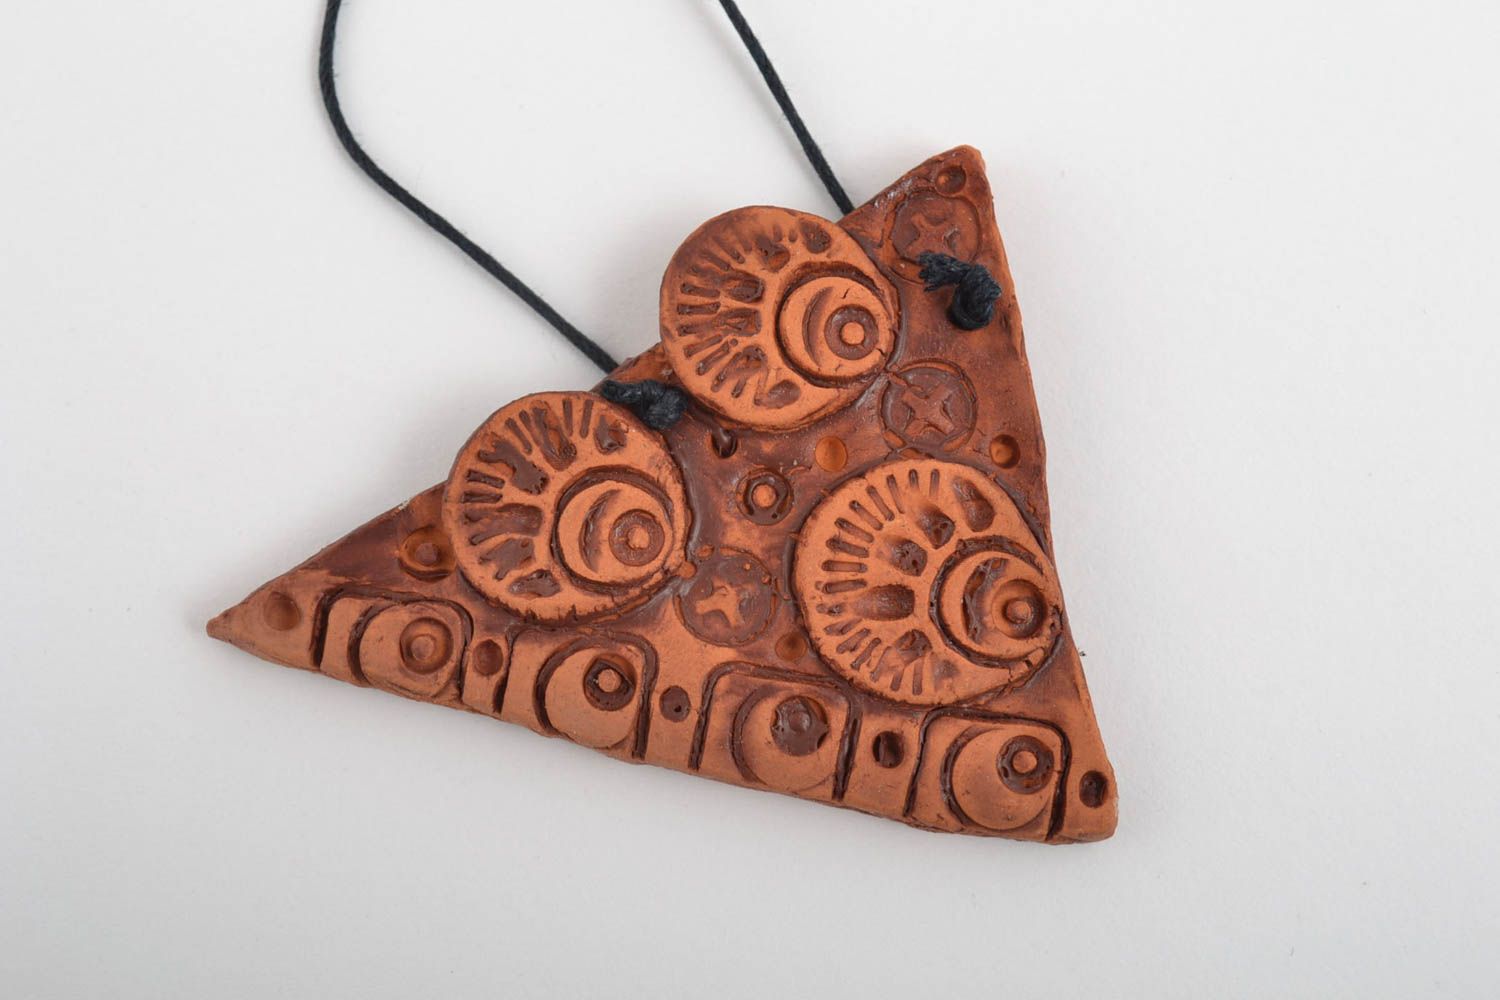 Eco friendly handmade ceramic pendant clay pendant jewelry trends gifts for her photo 3